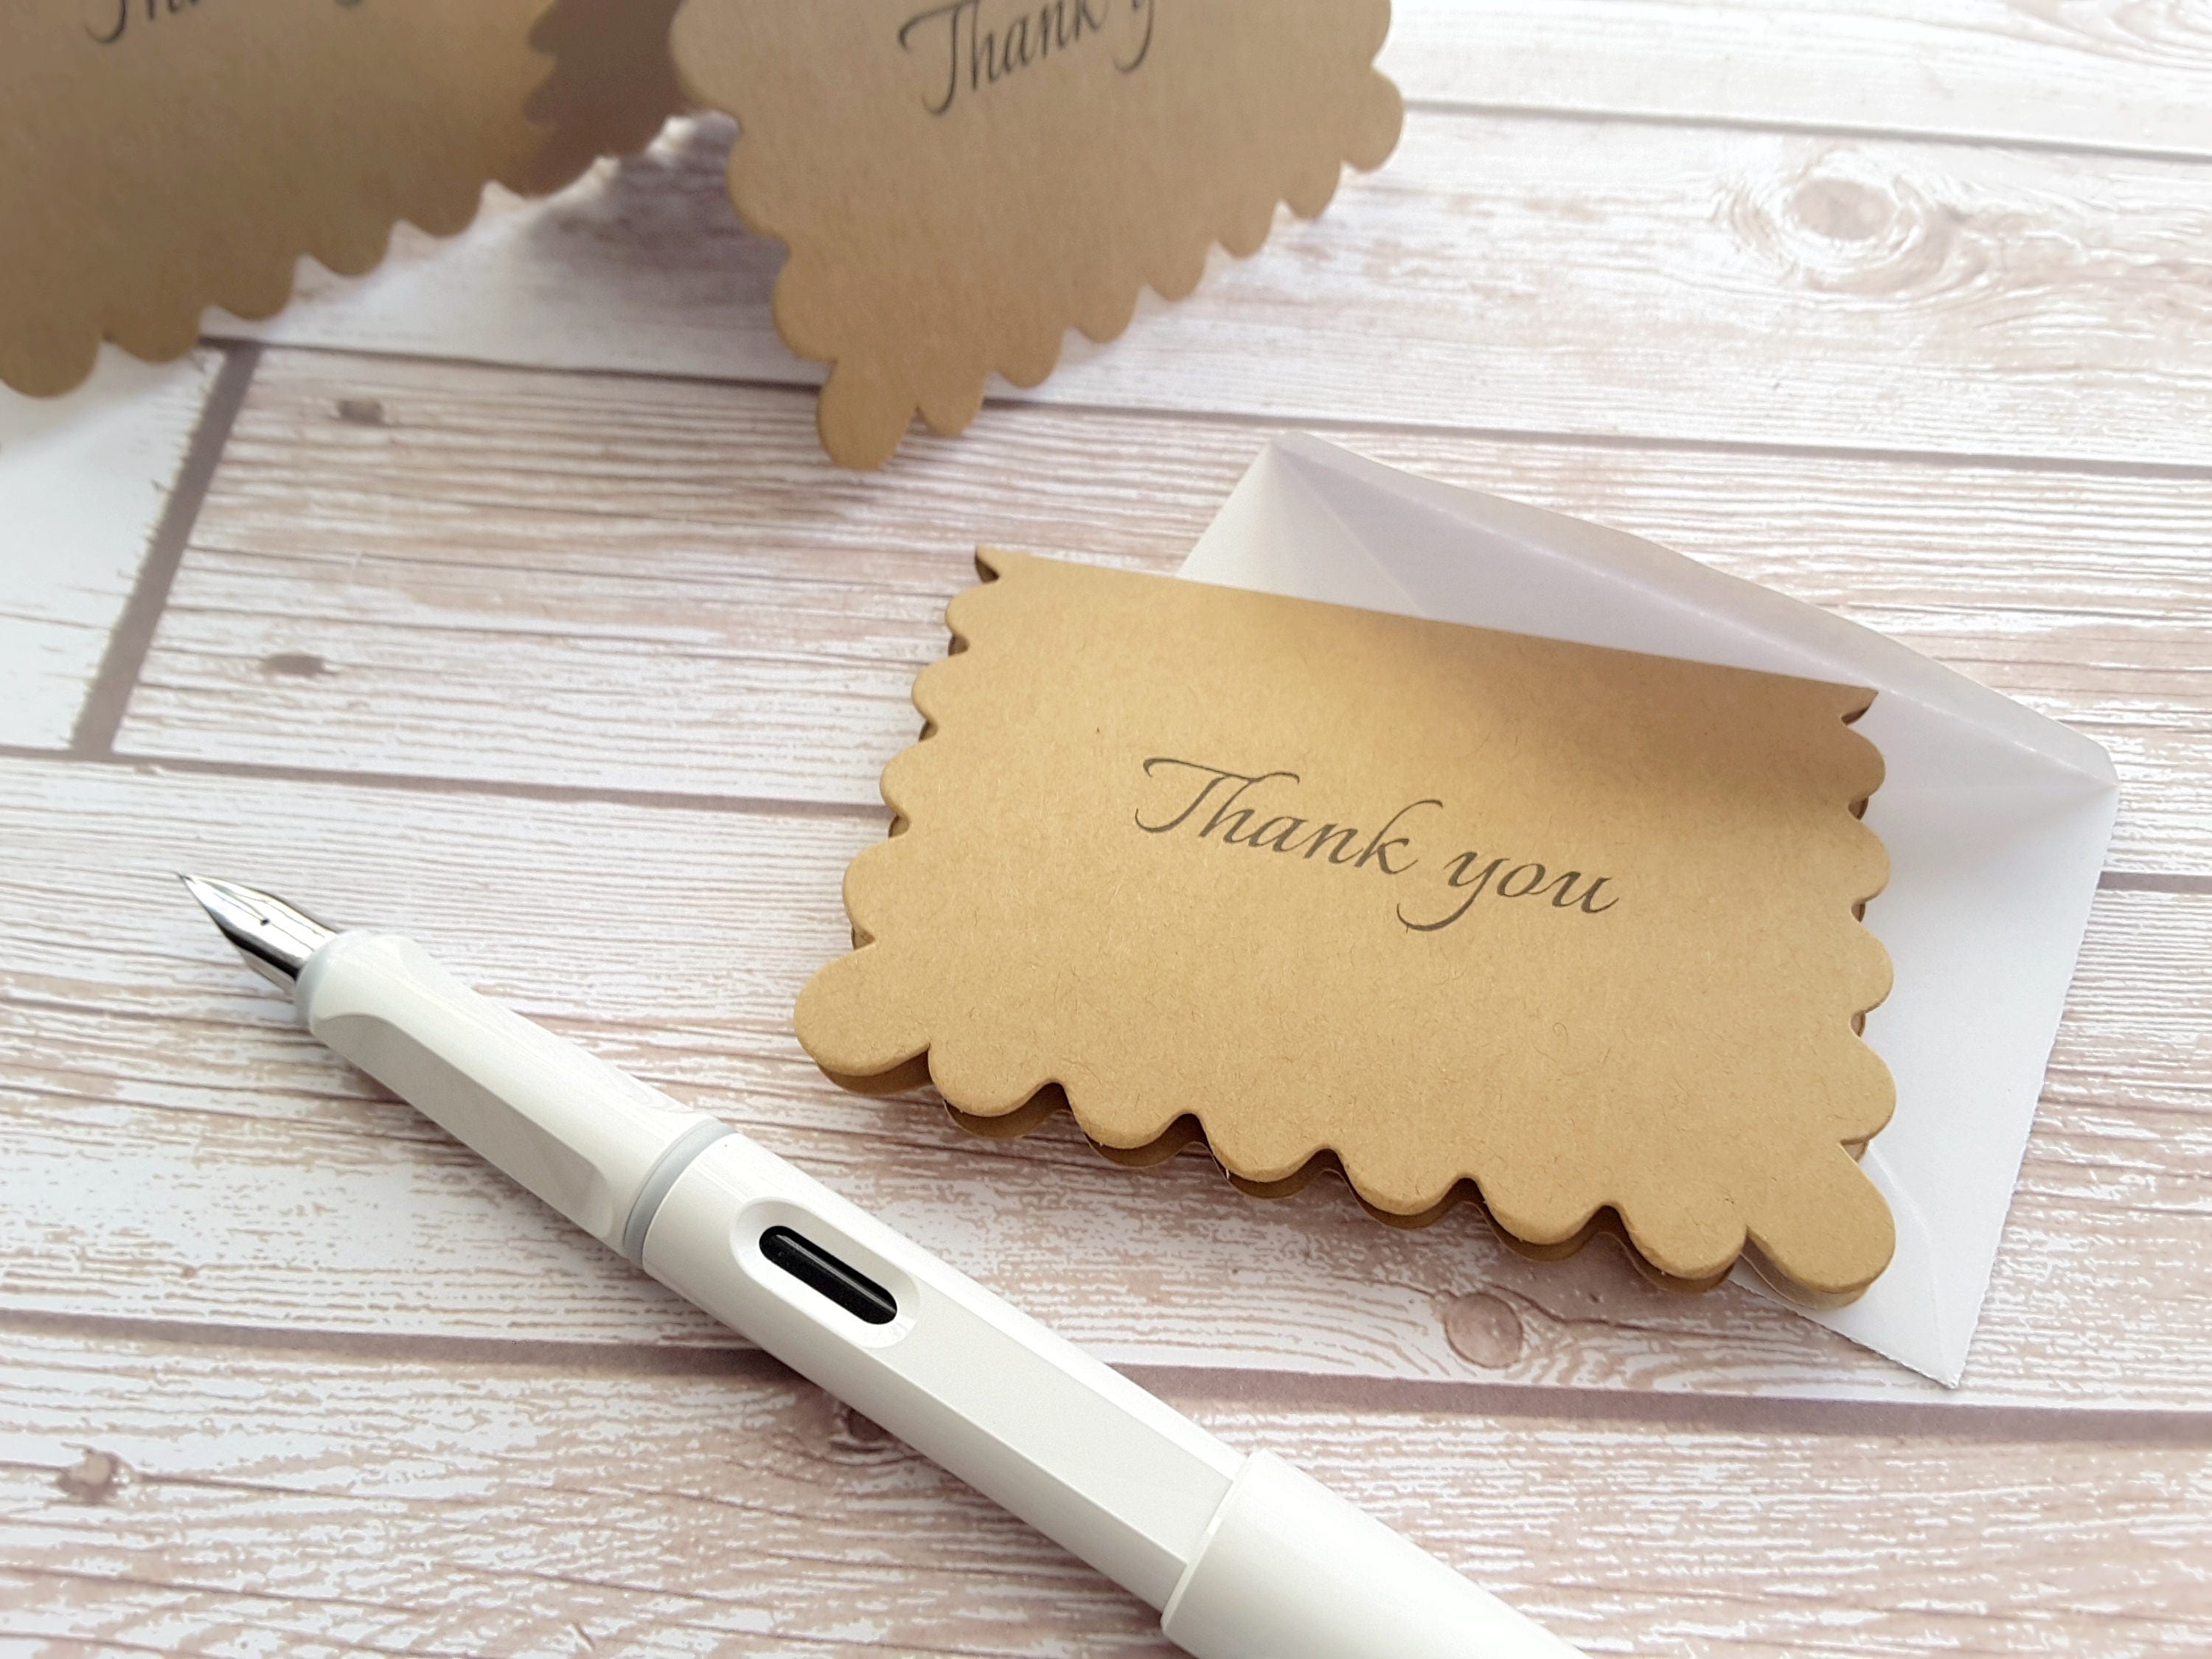  2 x 3.5 Simple Thank You Cards with  Envelope/White/Cream/Kraft Thank You Card/Small Note Cards/Mini Thank You  Card/Set of 20 : Handmade Products